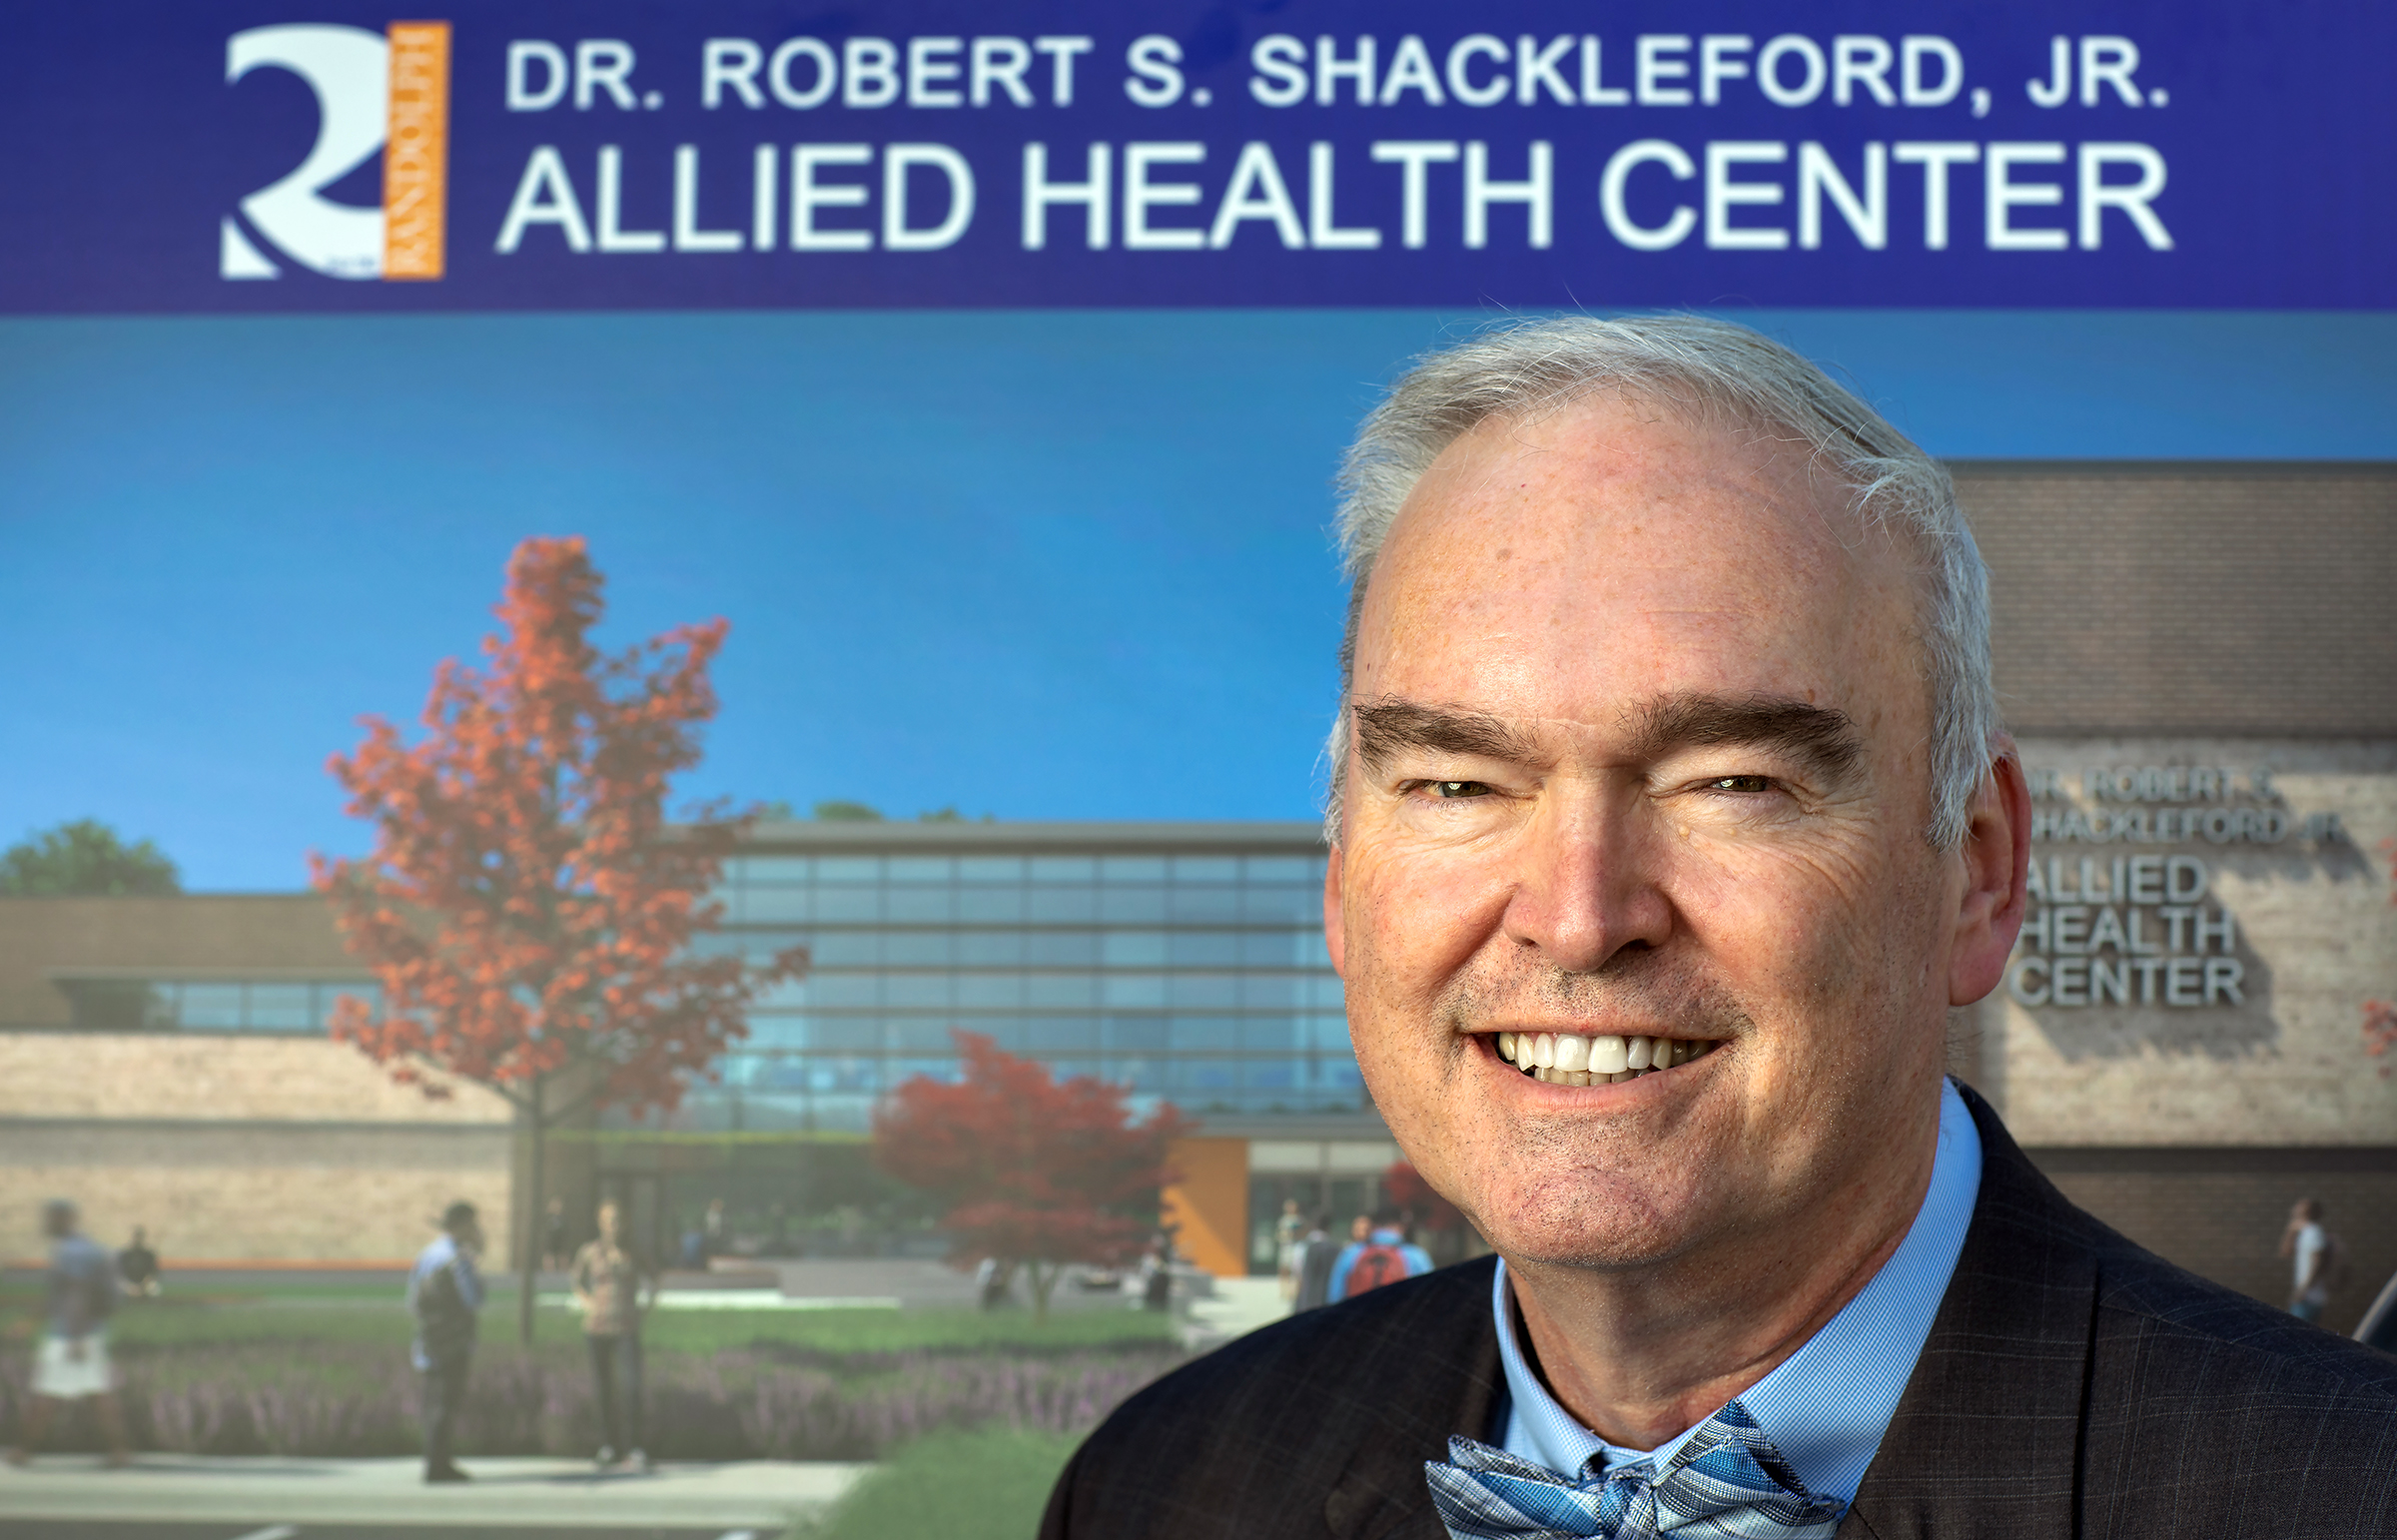 Randolph Community College President Dr. Robert S. Shackleford Jr. stands with an artist's rendering of the new Allied Health Center, which was named after him in a ceremony Thursday.